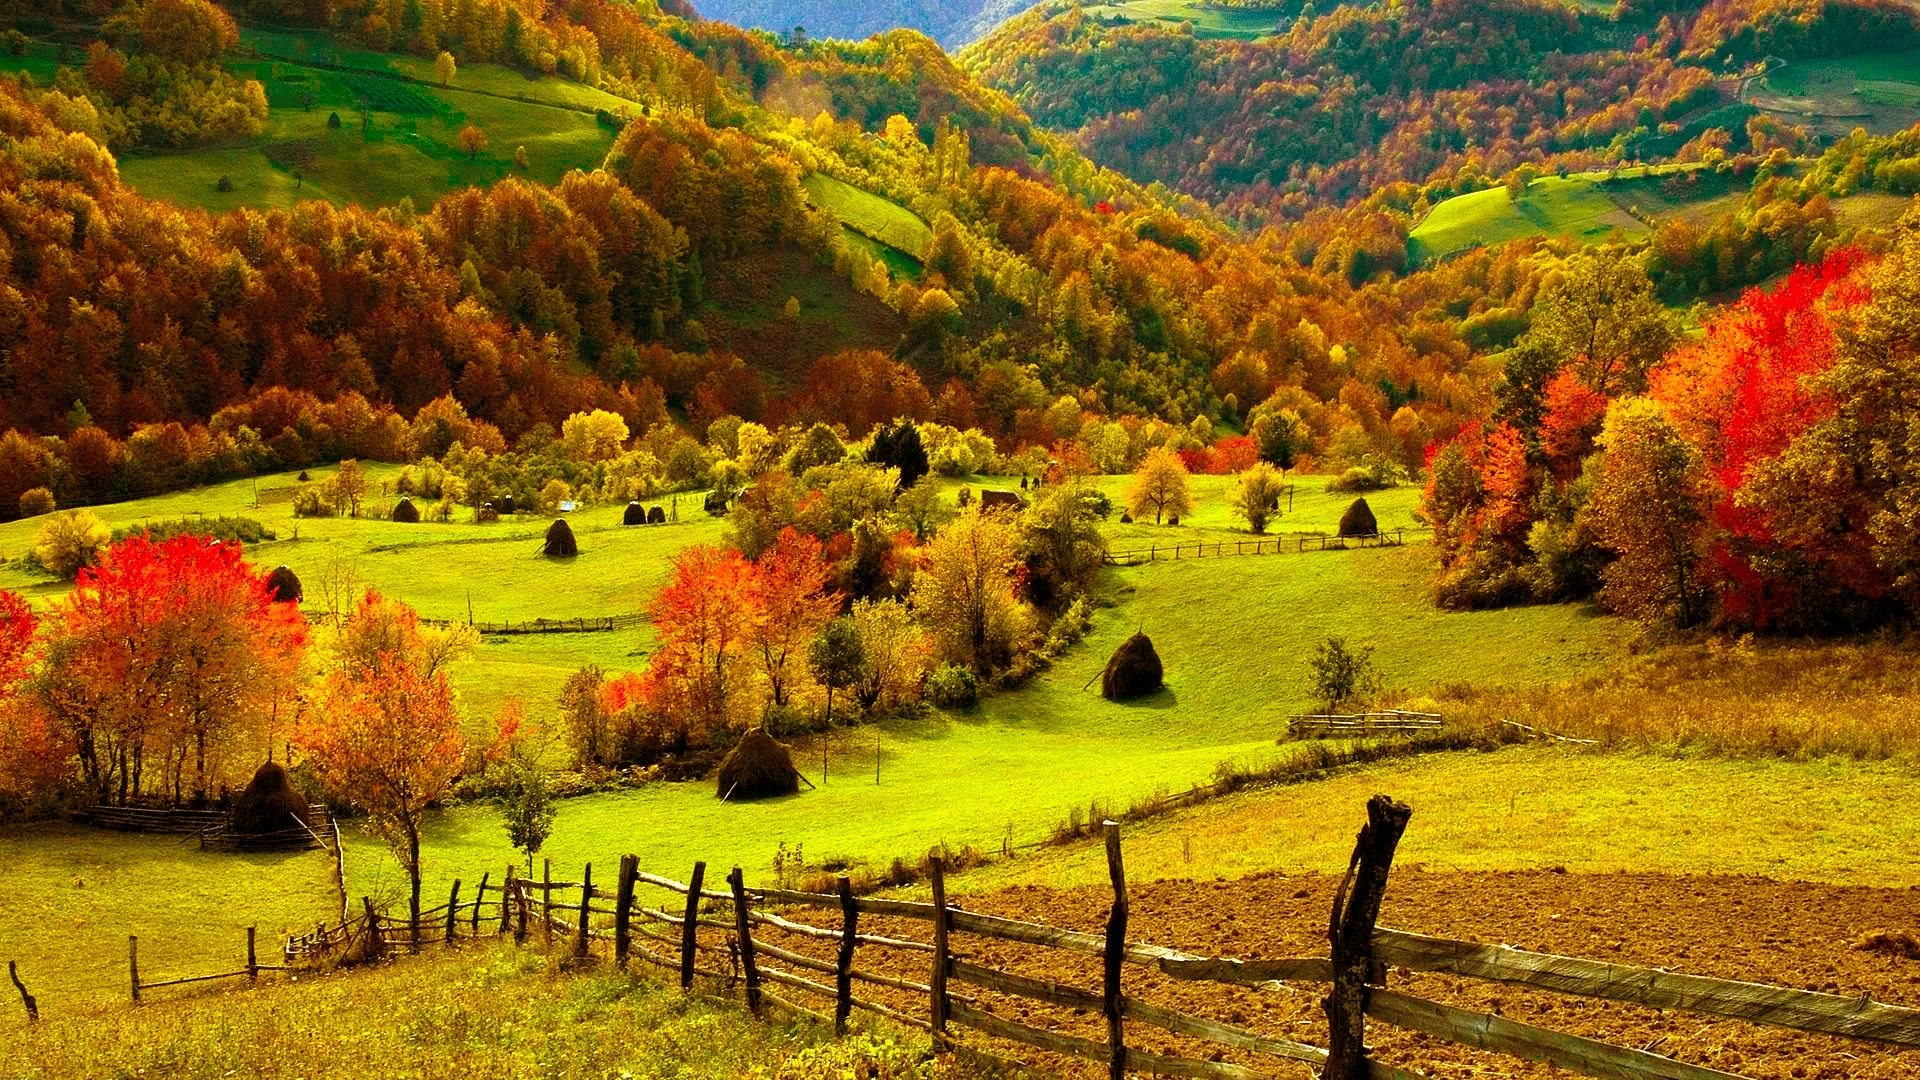 nature, Landscapes, Fields, Hills, Fence, Grass, Farm, Trees, Forests, Autumn, Fall, Seasons, Leaves, Color, Scenic, View, Bright Wallpaper